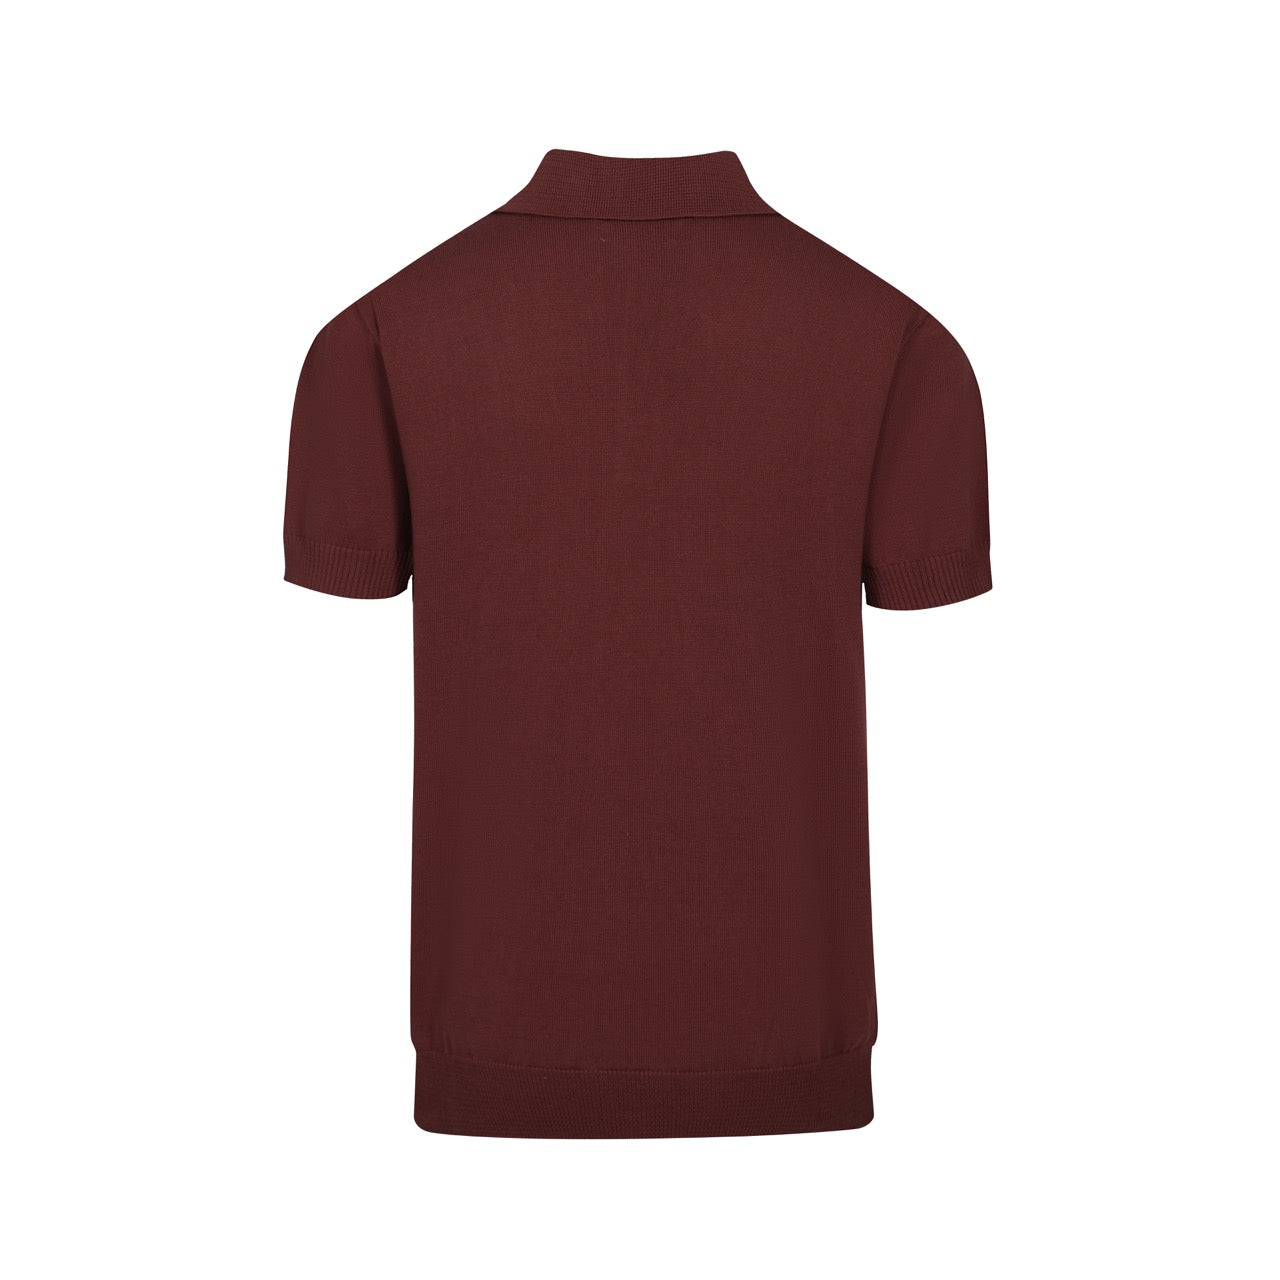 Men's Dark Brown Knitted Polo With Off White Stripe Jacquard Panel